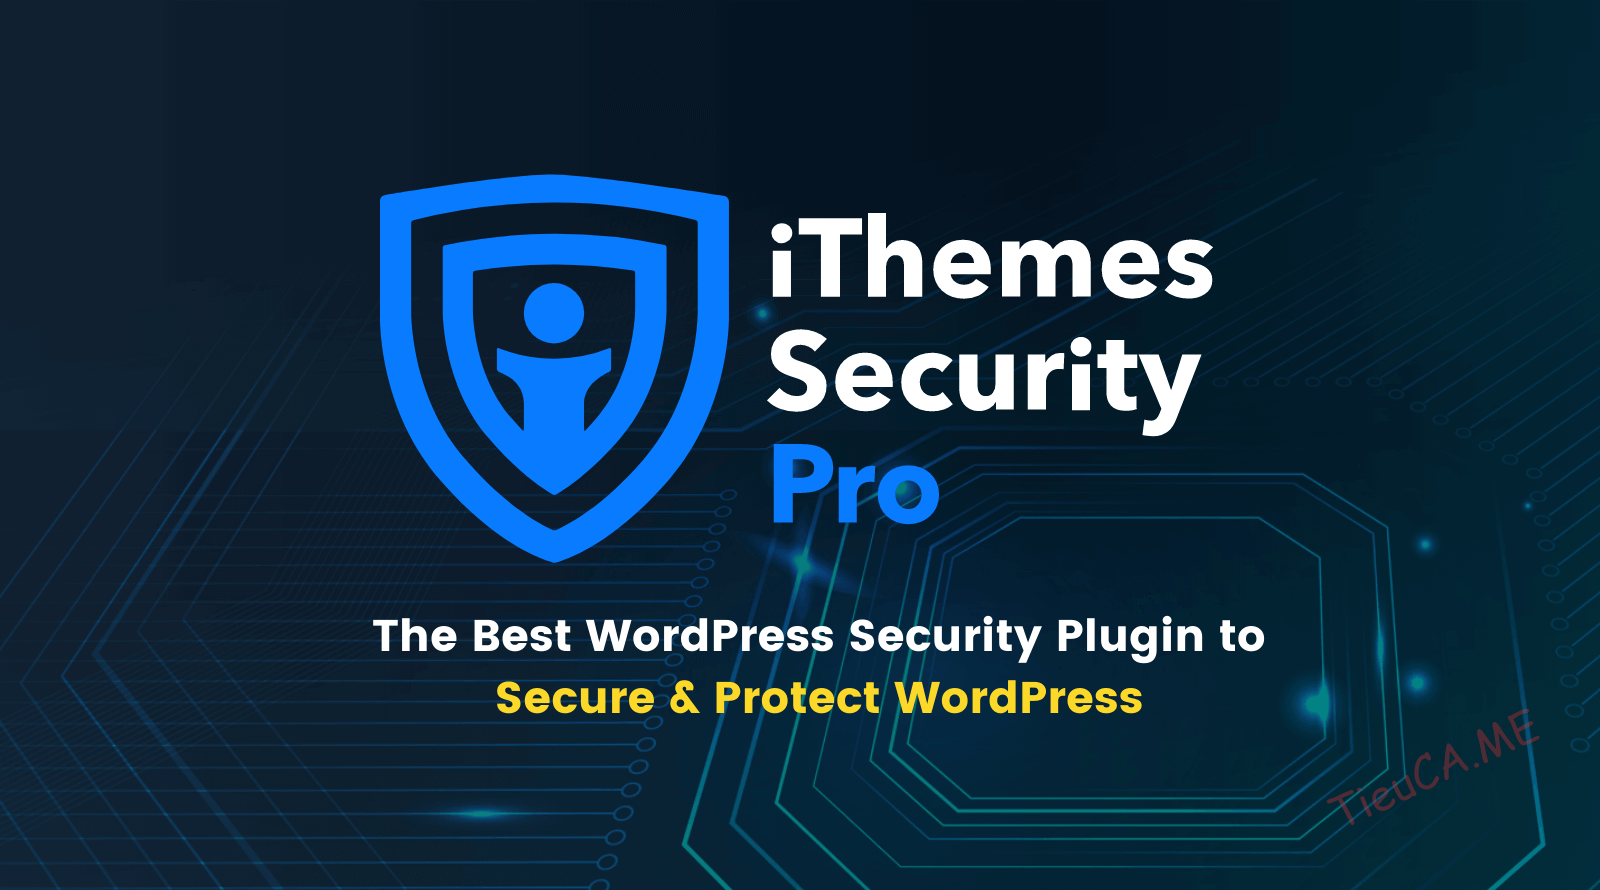 ithemes security featured home